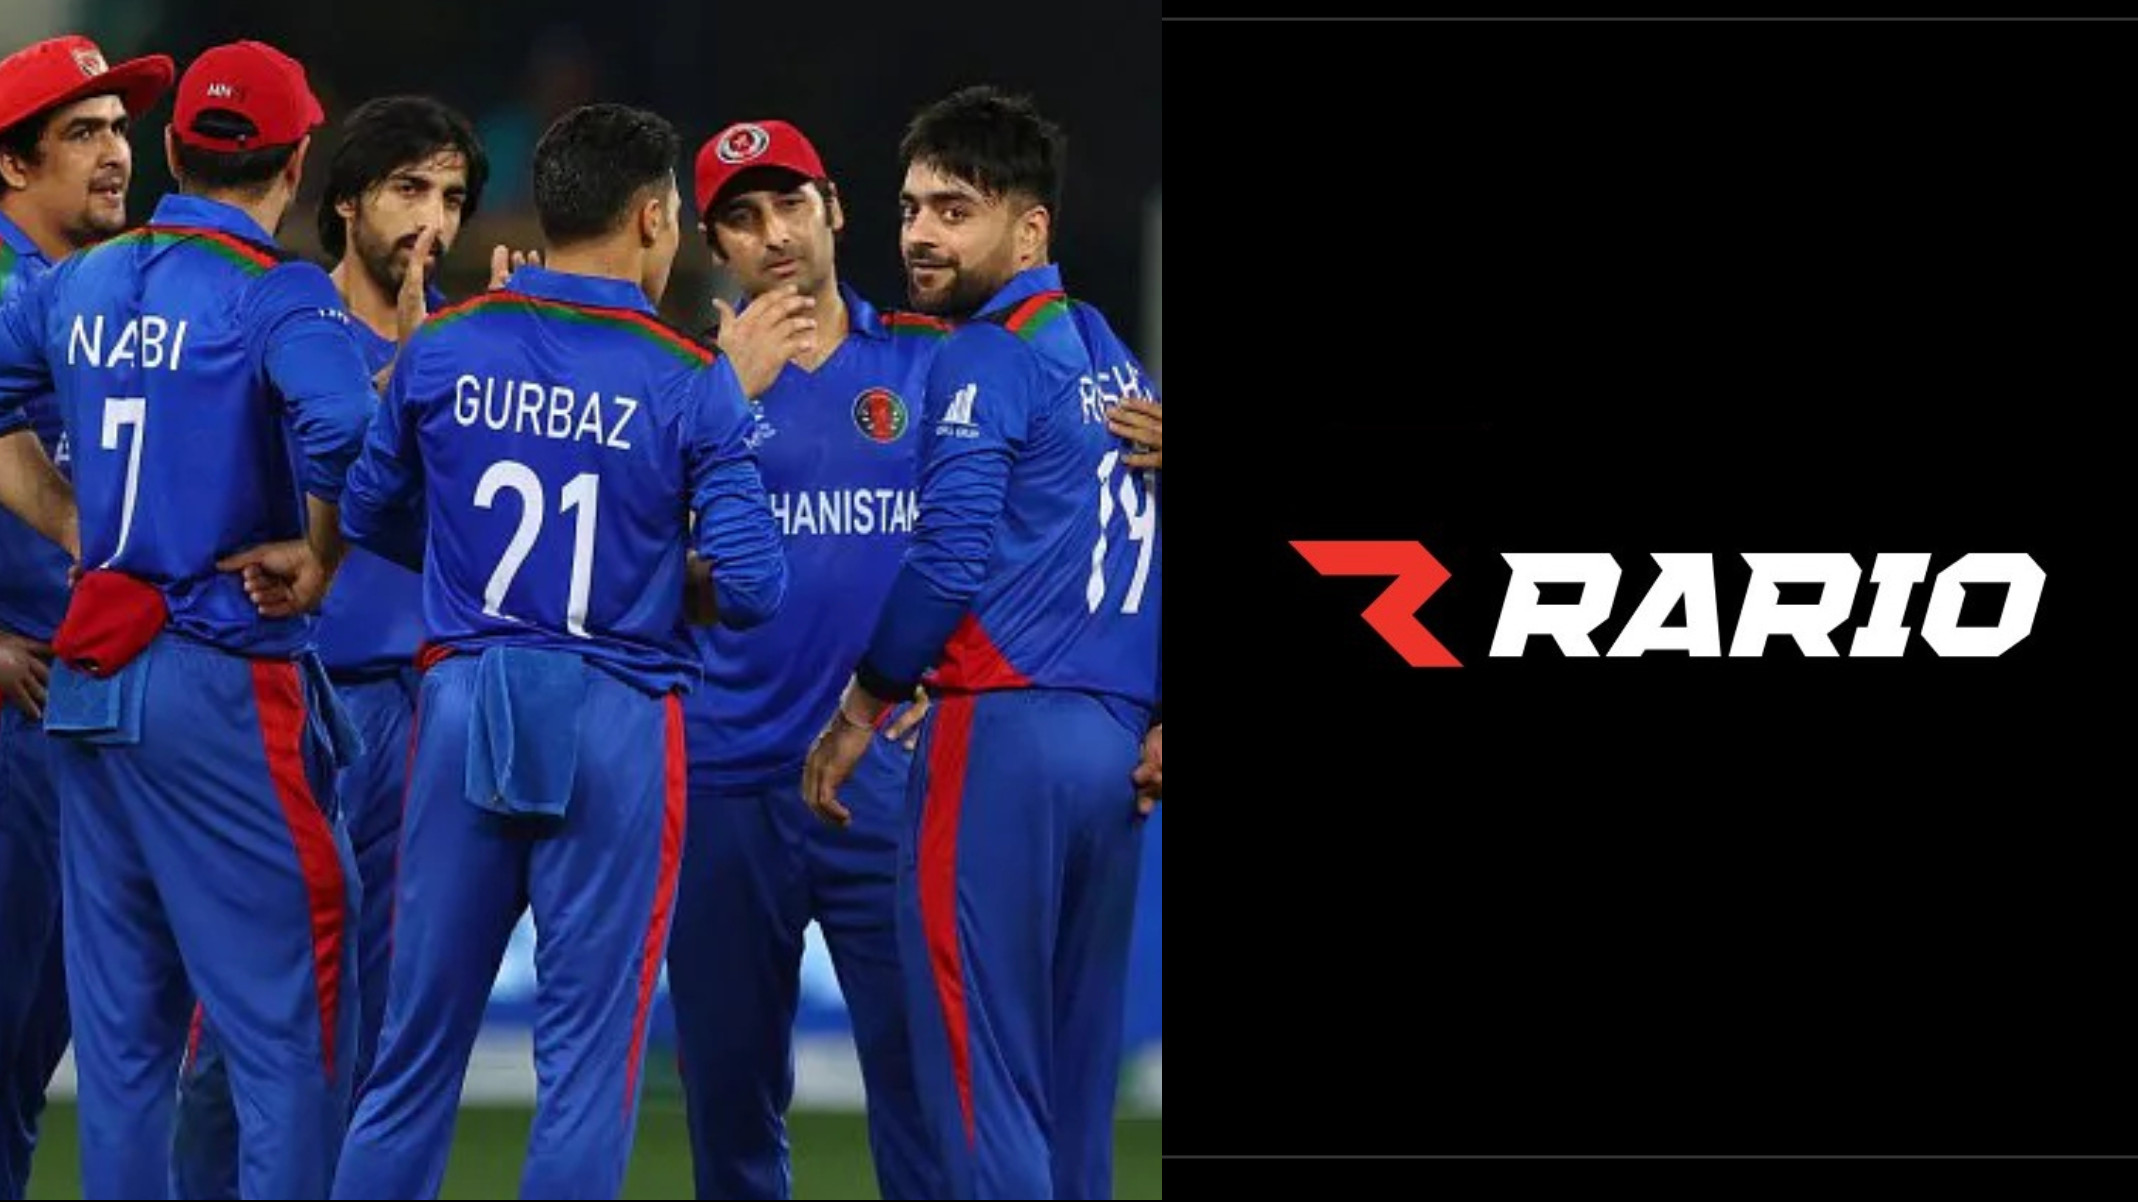 Rario announces partnership with Afghanistan Cricket Board to launch their first sports NFT and Metaverse